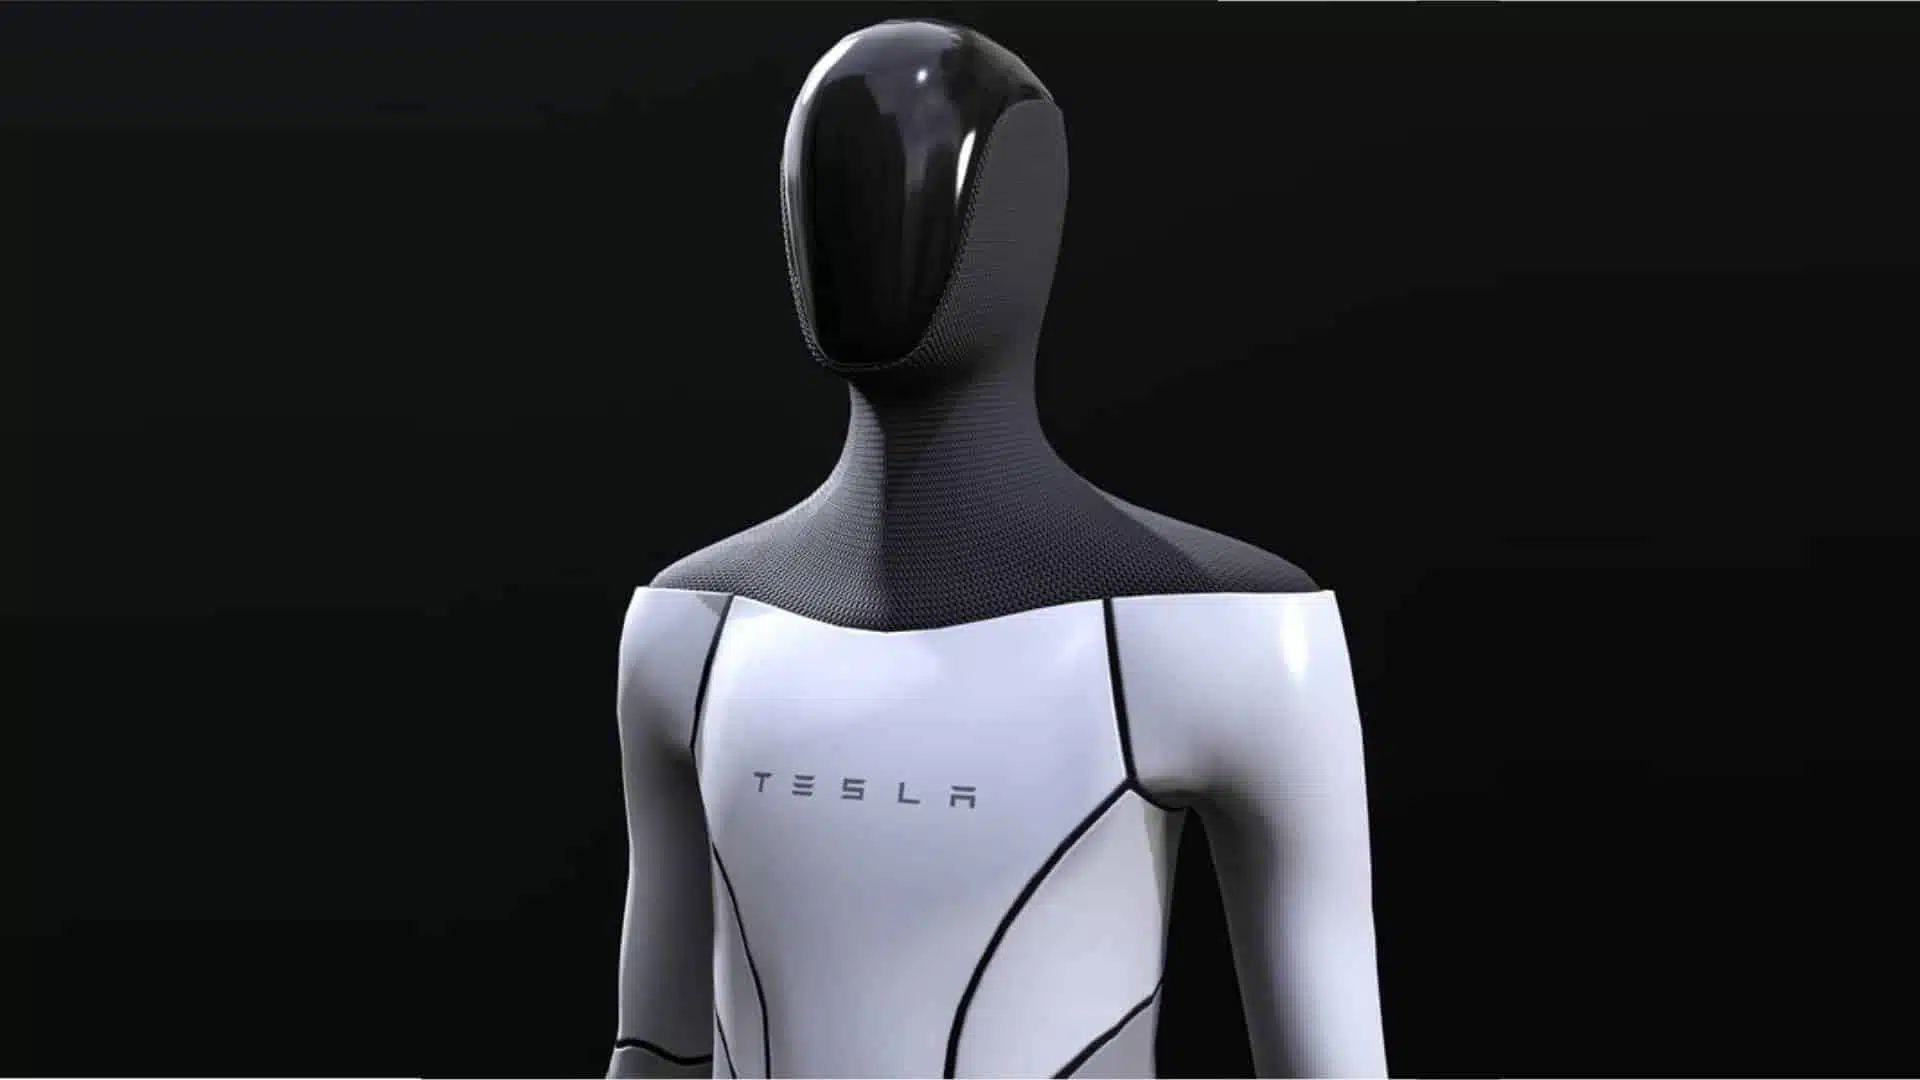 Tesla aims to begin production of its Optimus robot-like humanoid in 2023